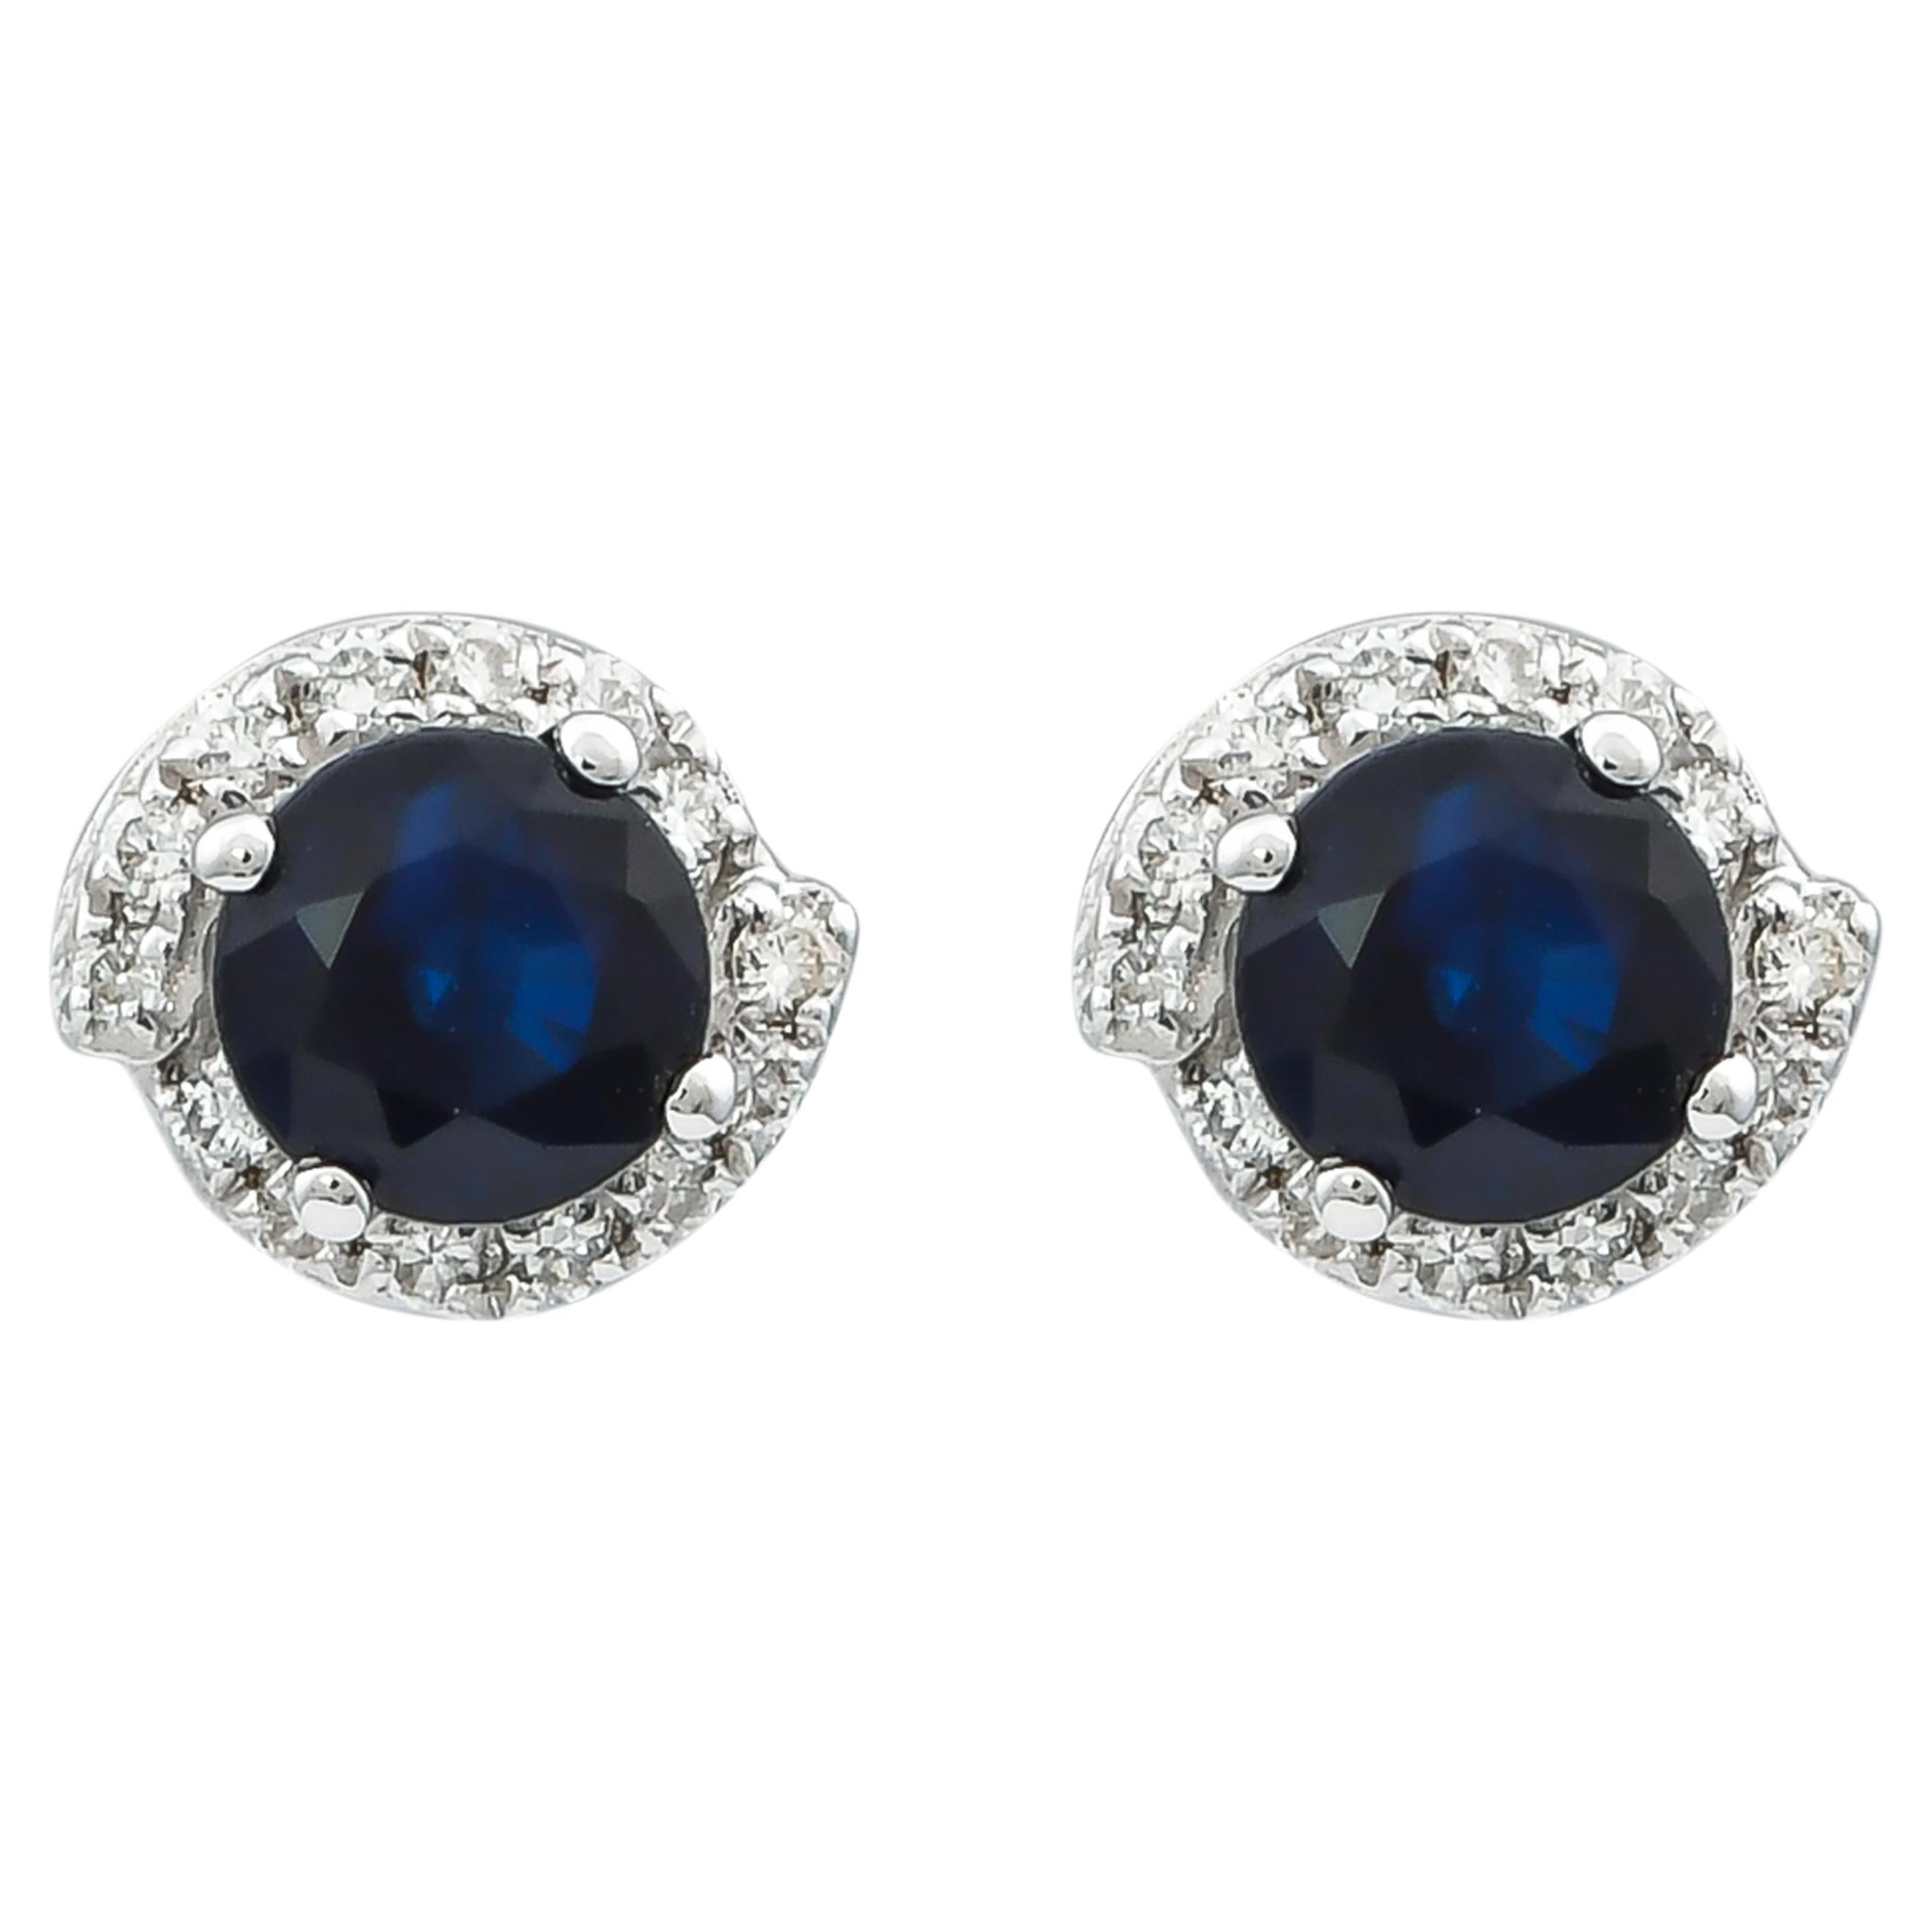 1.0 Carat Blue Sapphire and Diamond Earring in 18 Karat White Gold For Sale